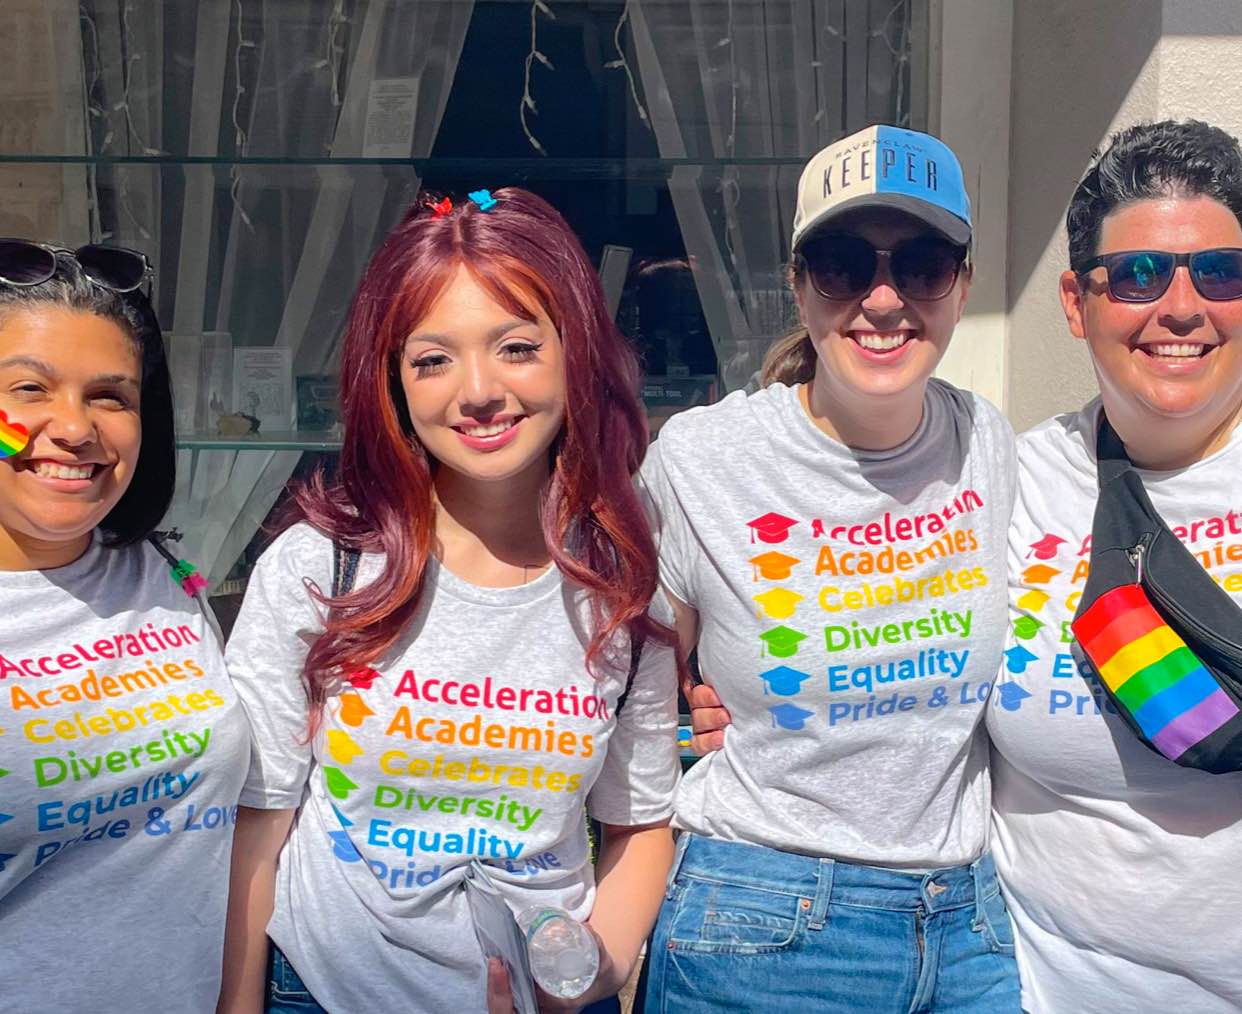 Acceleration Academies Teachers and Students Bond at Pride